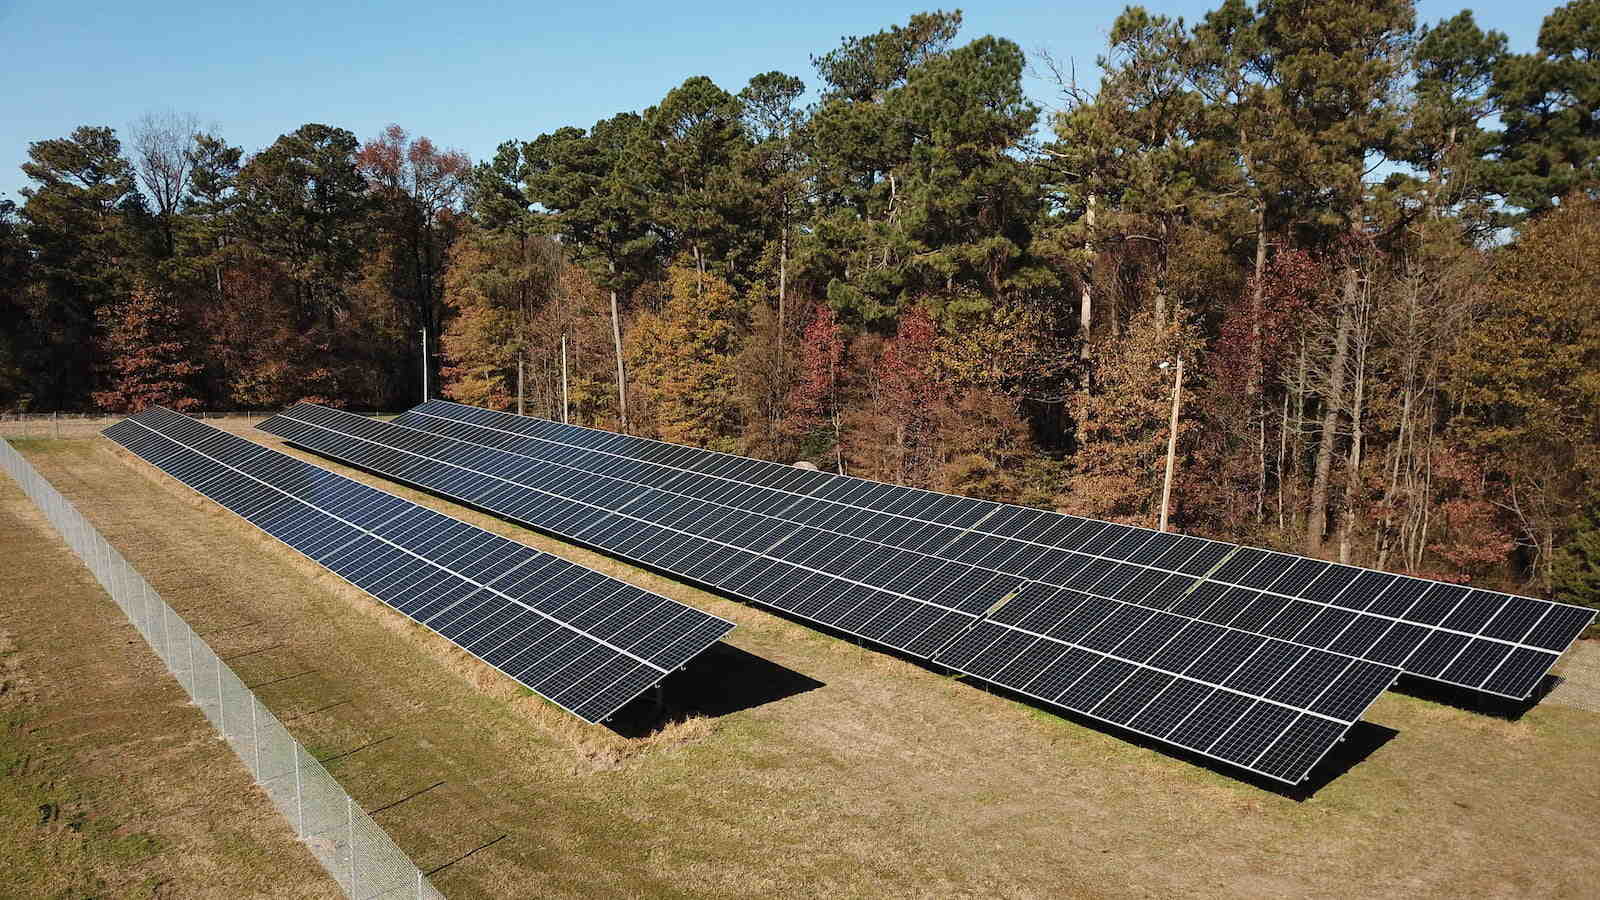 What are the environmental advantages of solar energy?